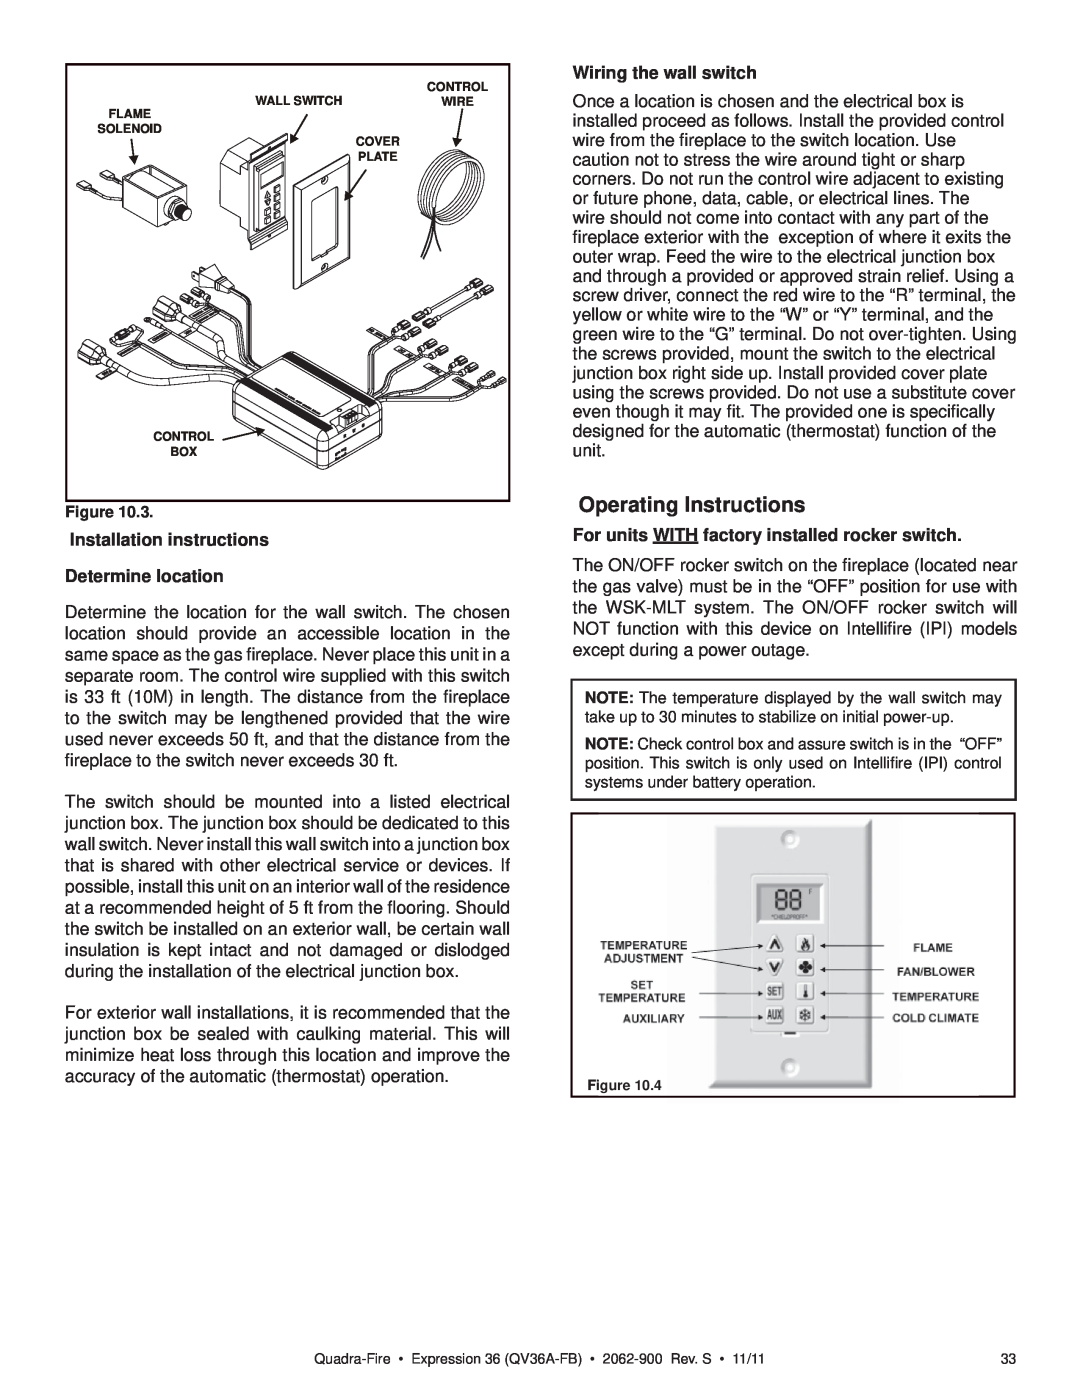 Quadra-Fire QV36A-FB Operating Instructions, Installation instructions Determine location, Wiring the wall switch 